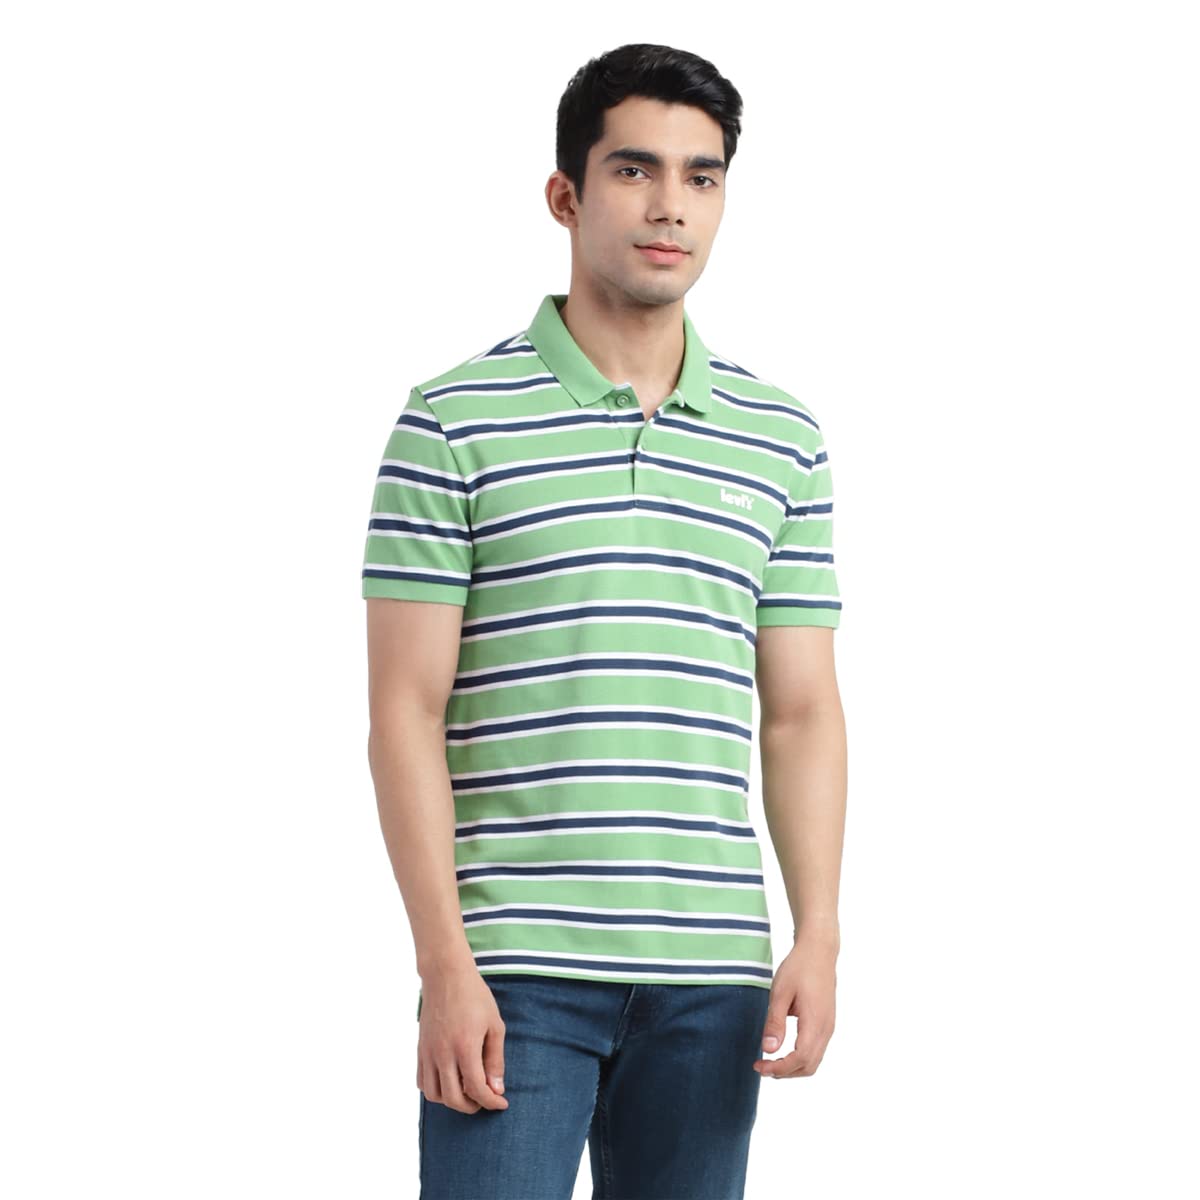 Levi's Men's Fitted Polo Shirt (17474-0267_Peppermint Green/Blue M)